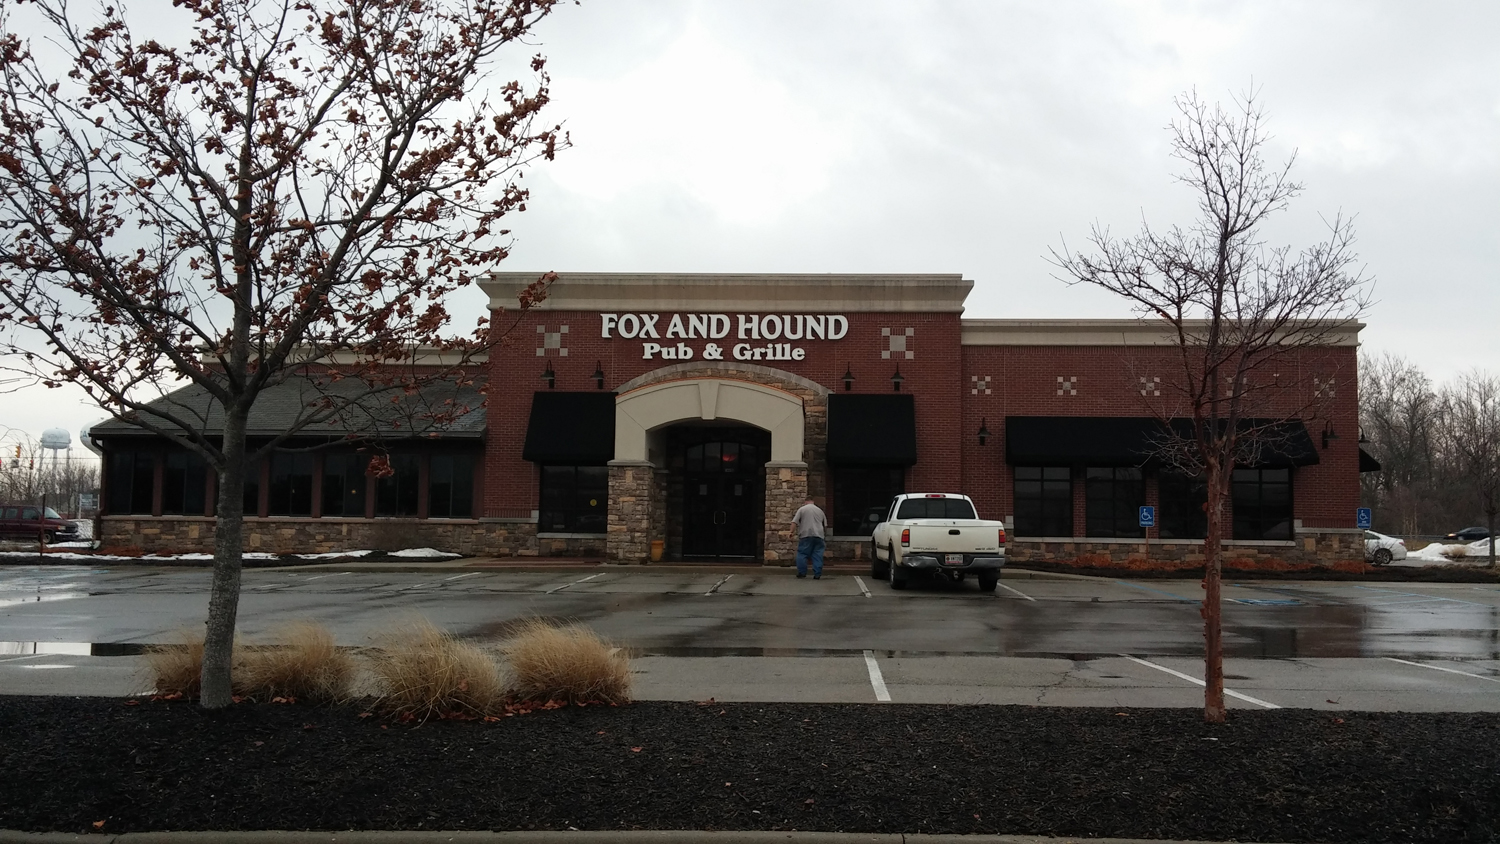 The Fox and Hound was located behind the Lowes at 146th Street and U.S. 31 (Staff photo)